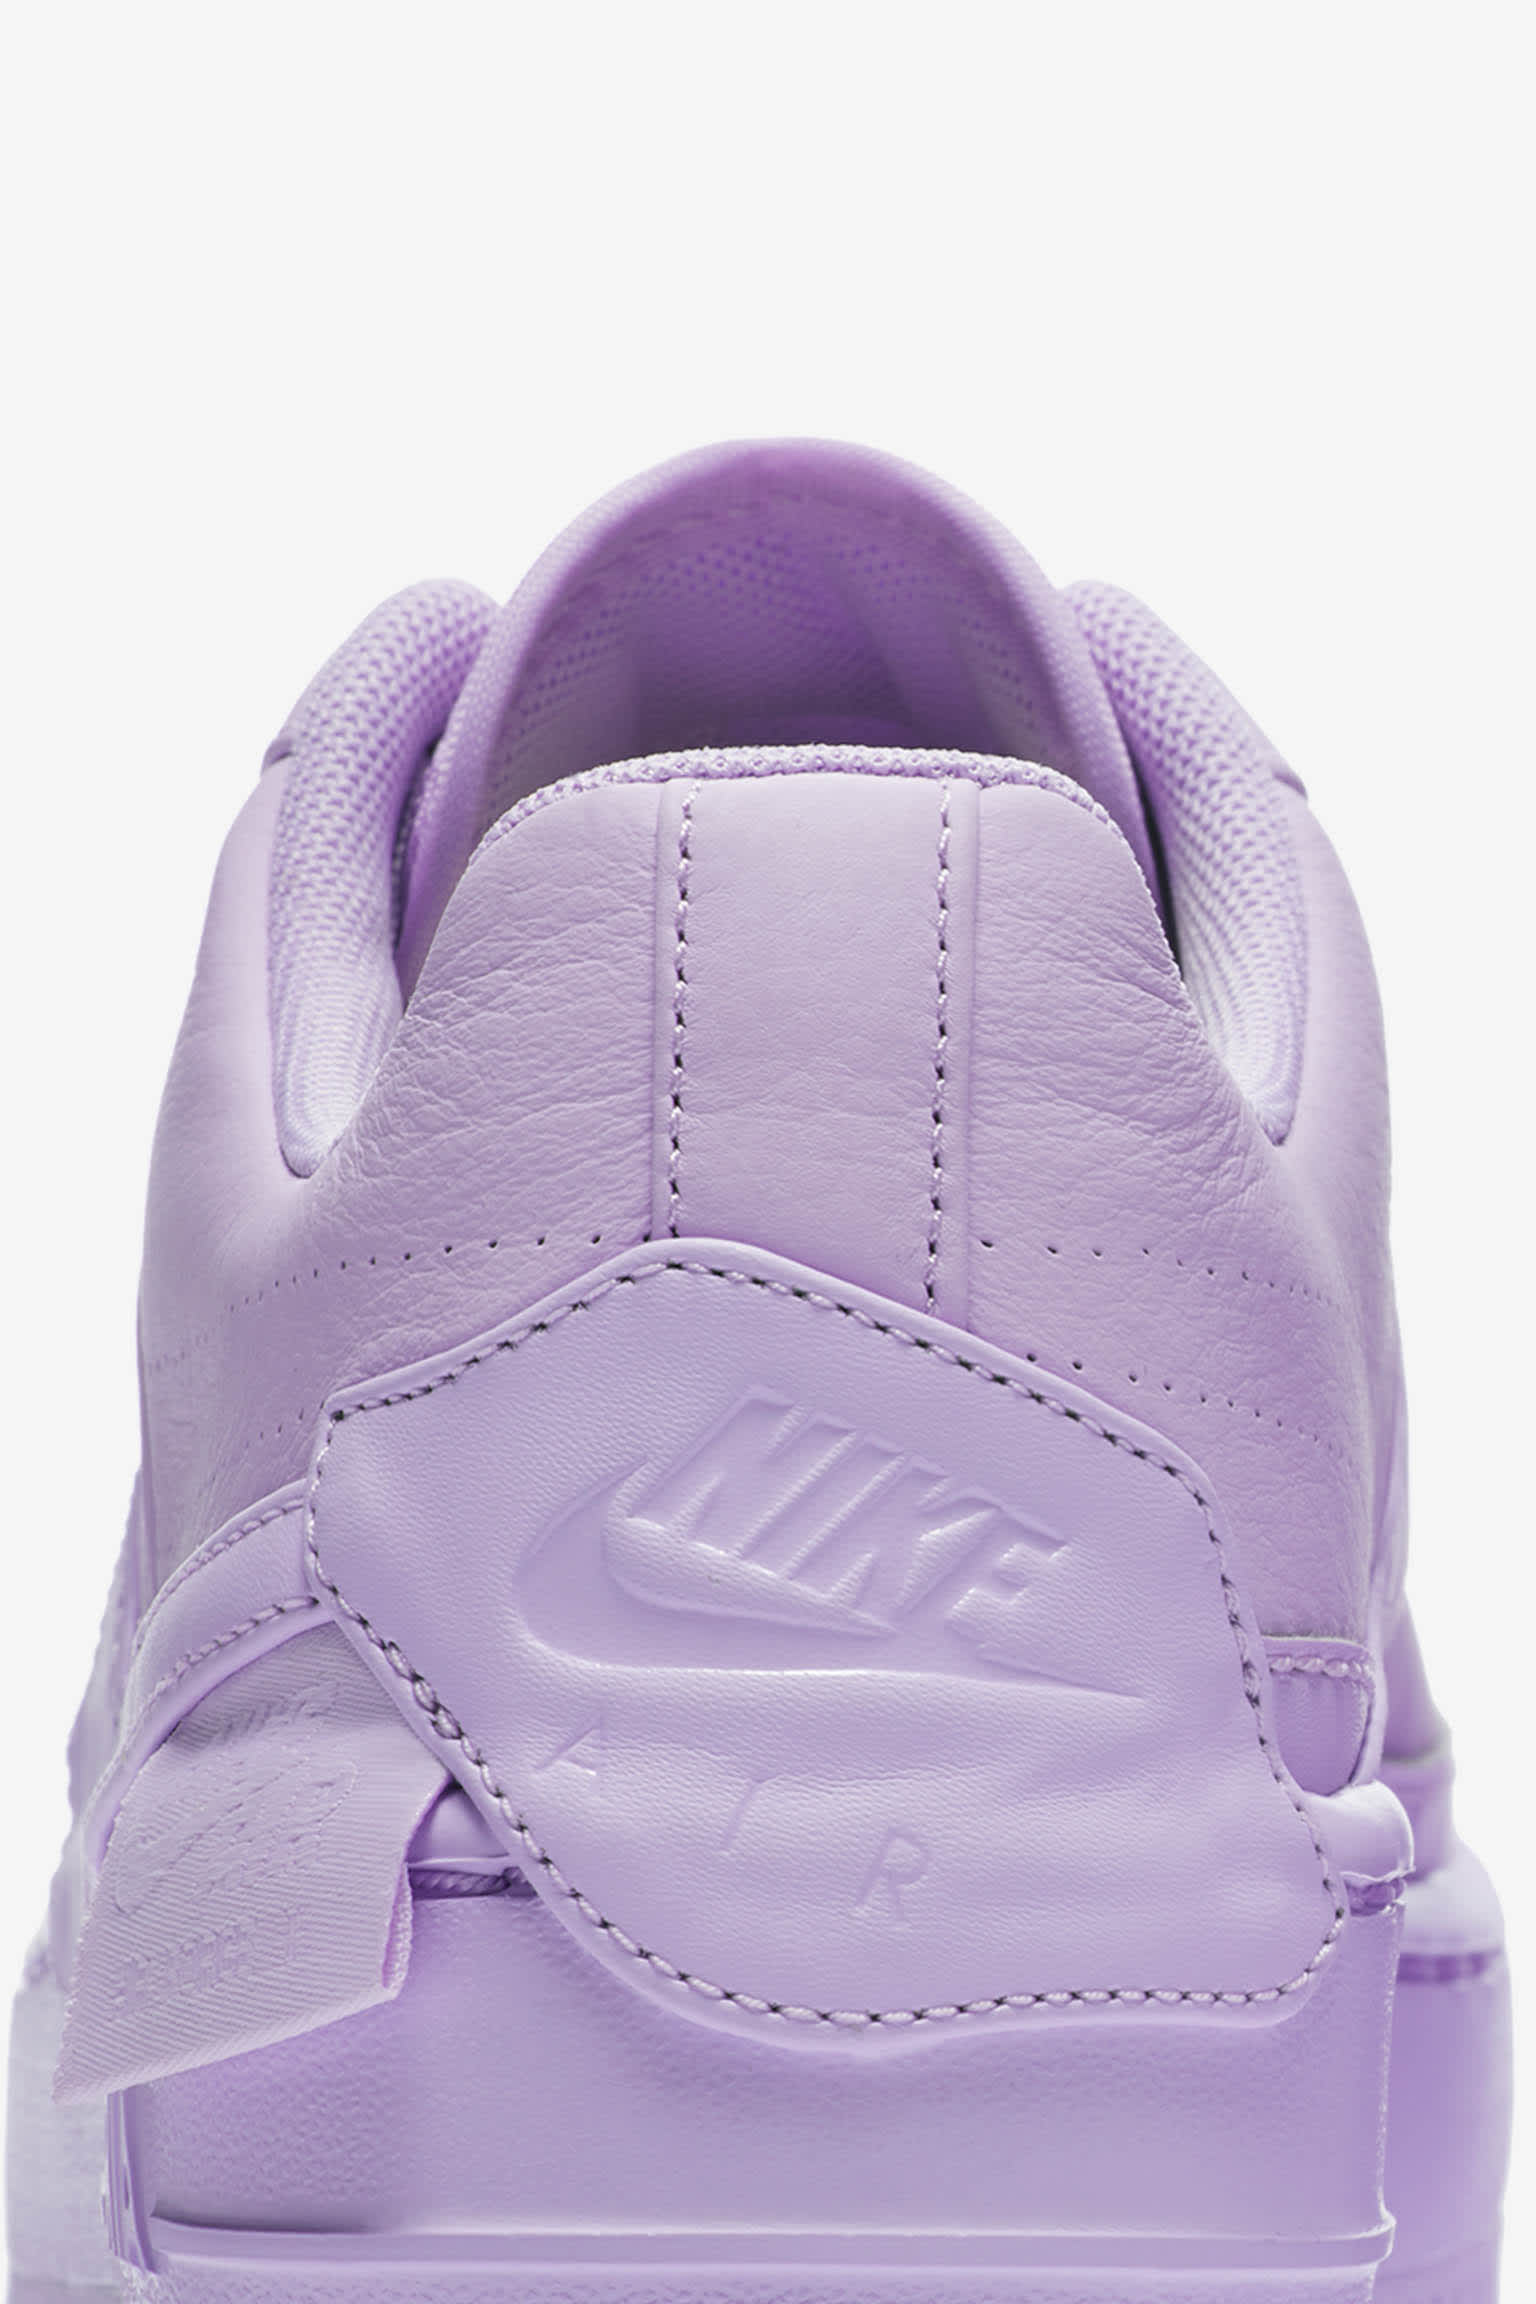 nike air force 1 low jester violet mist womens